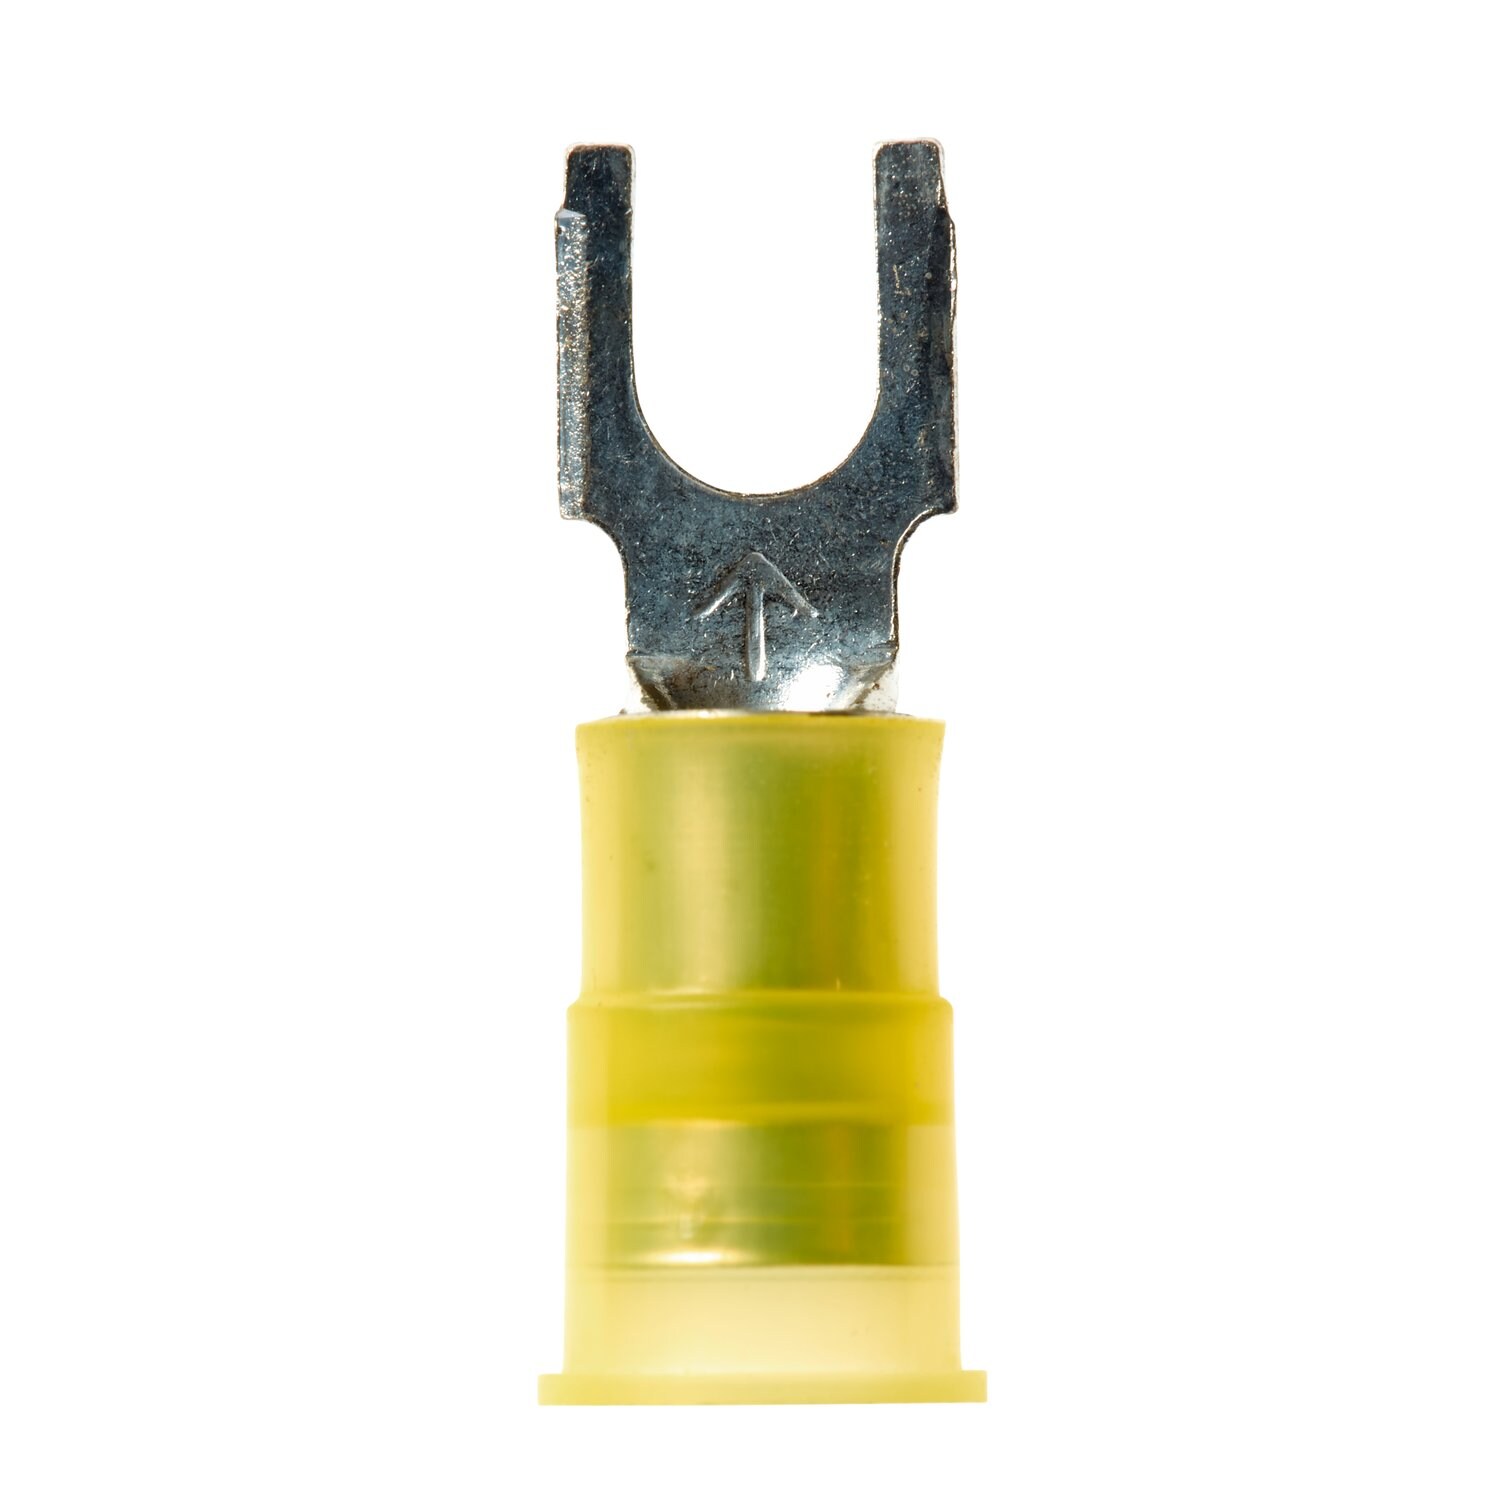 7000133305 - 3M Scotchlok Block Fork Nylon Insulated, 100/bottle, MNG14-10FBX,
suitable for use in a terminal block, 500/Case